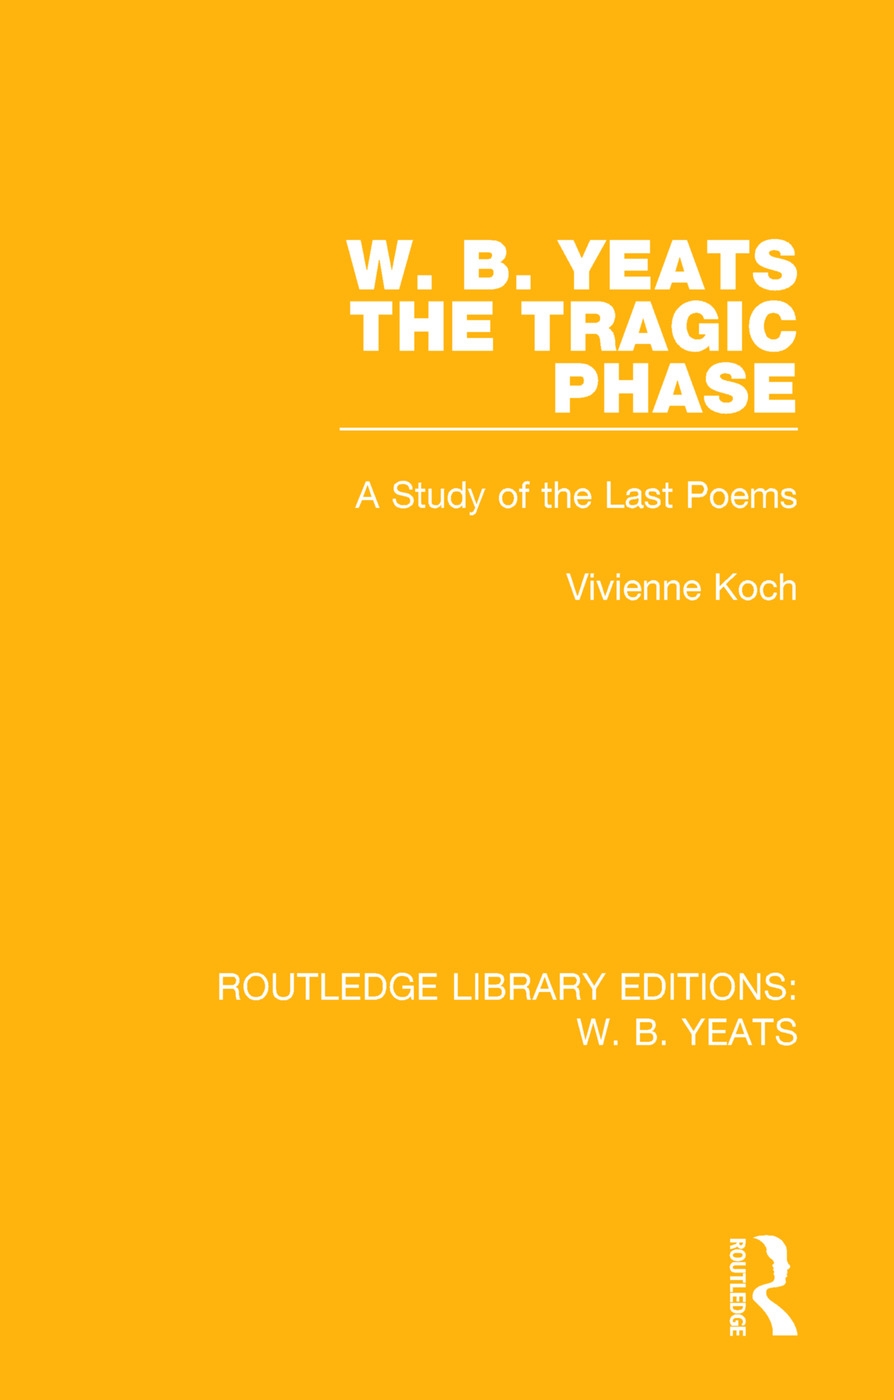 W. B. Yeats The Tragic Phase: A Study of the Last Poems